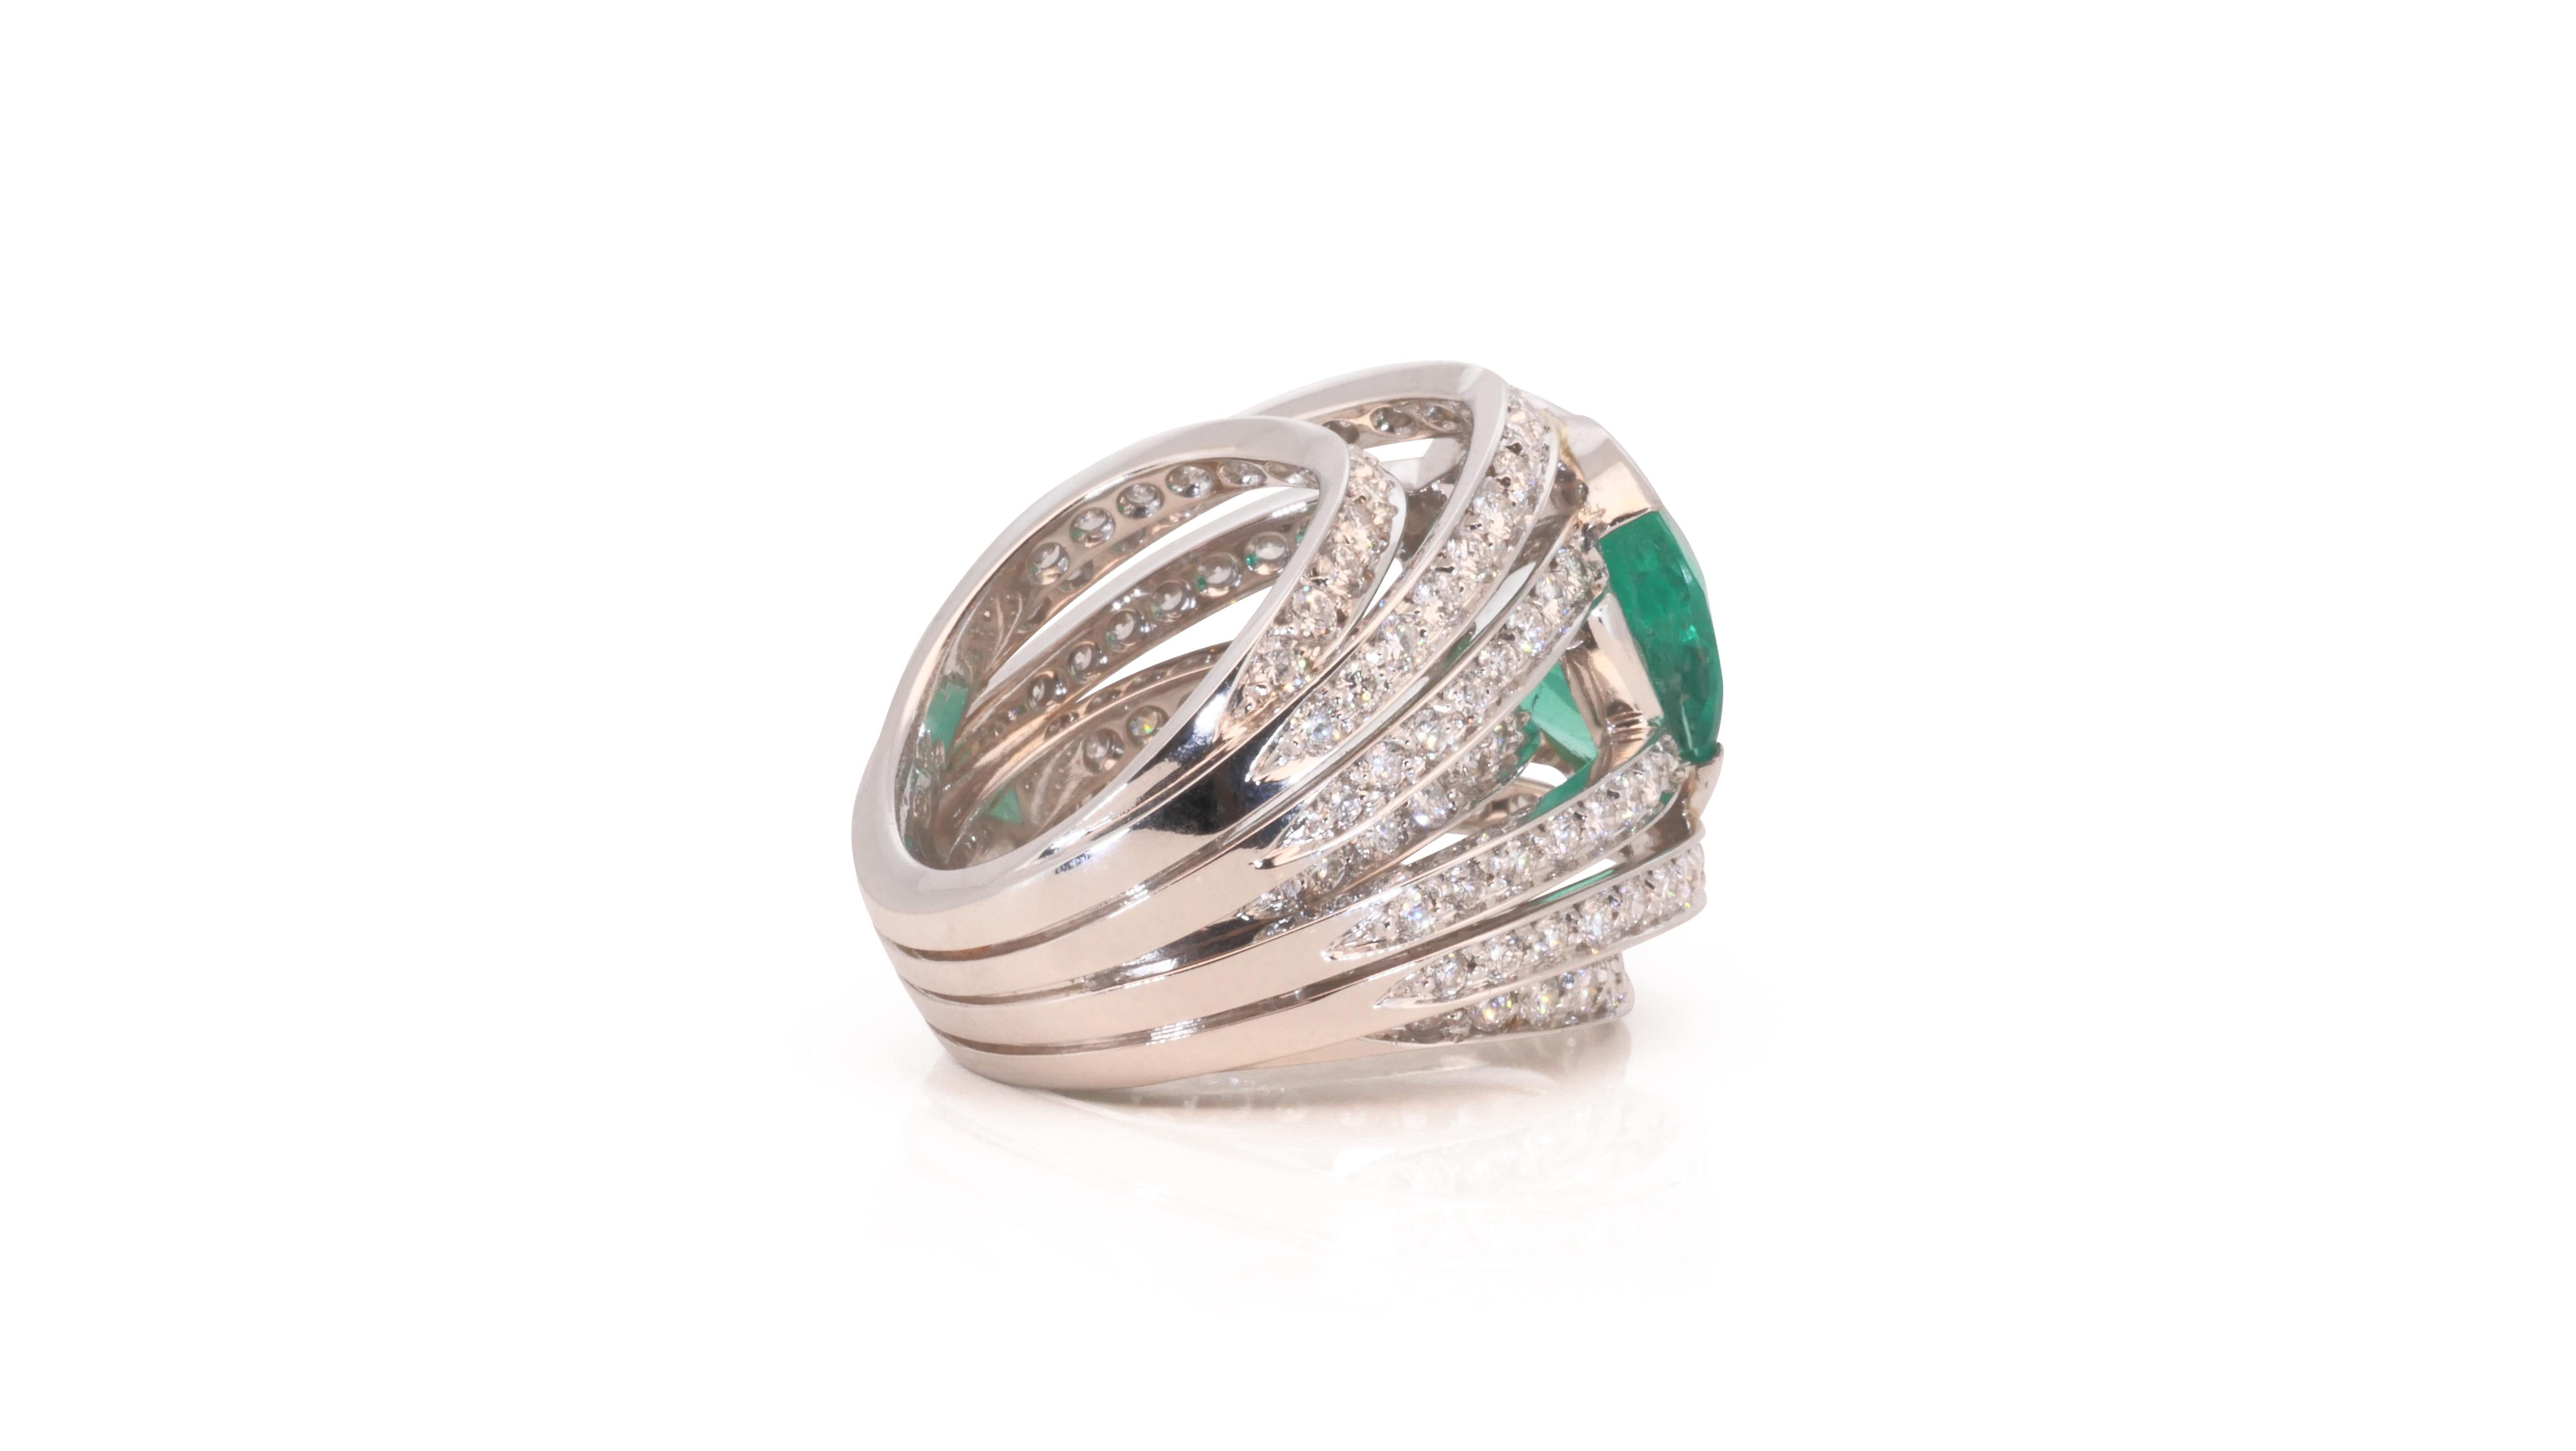 18k White Gold Heart Dome Ring 8.51 Carat Natural Emerald and Diamonds Grs Cert For Sale 2